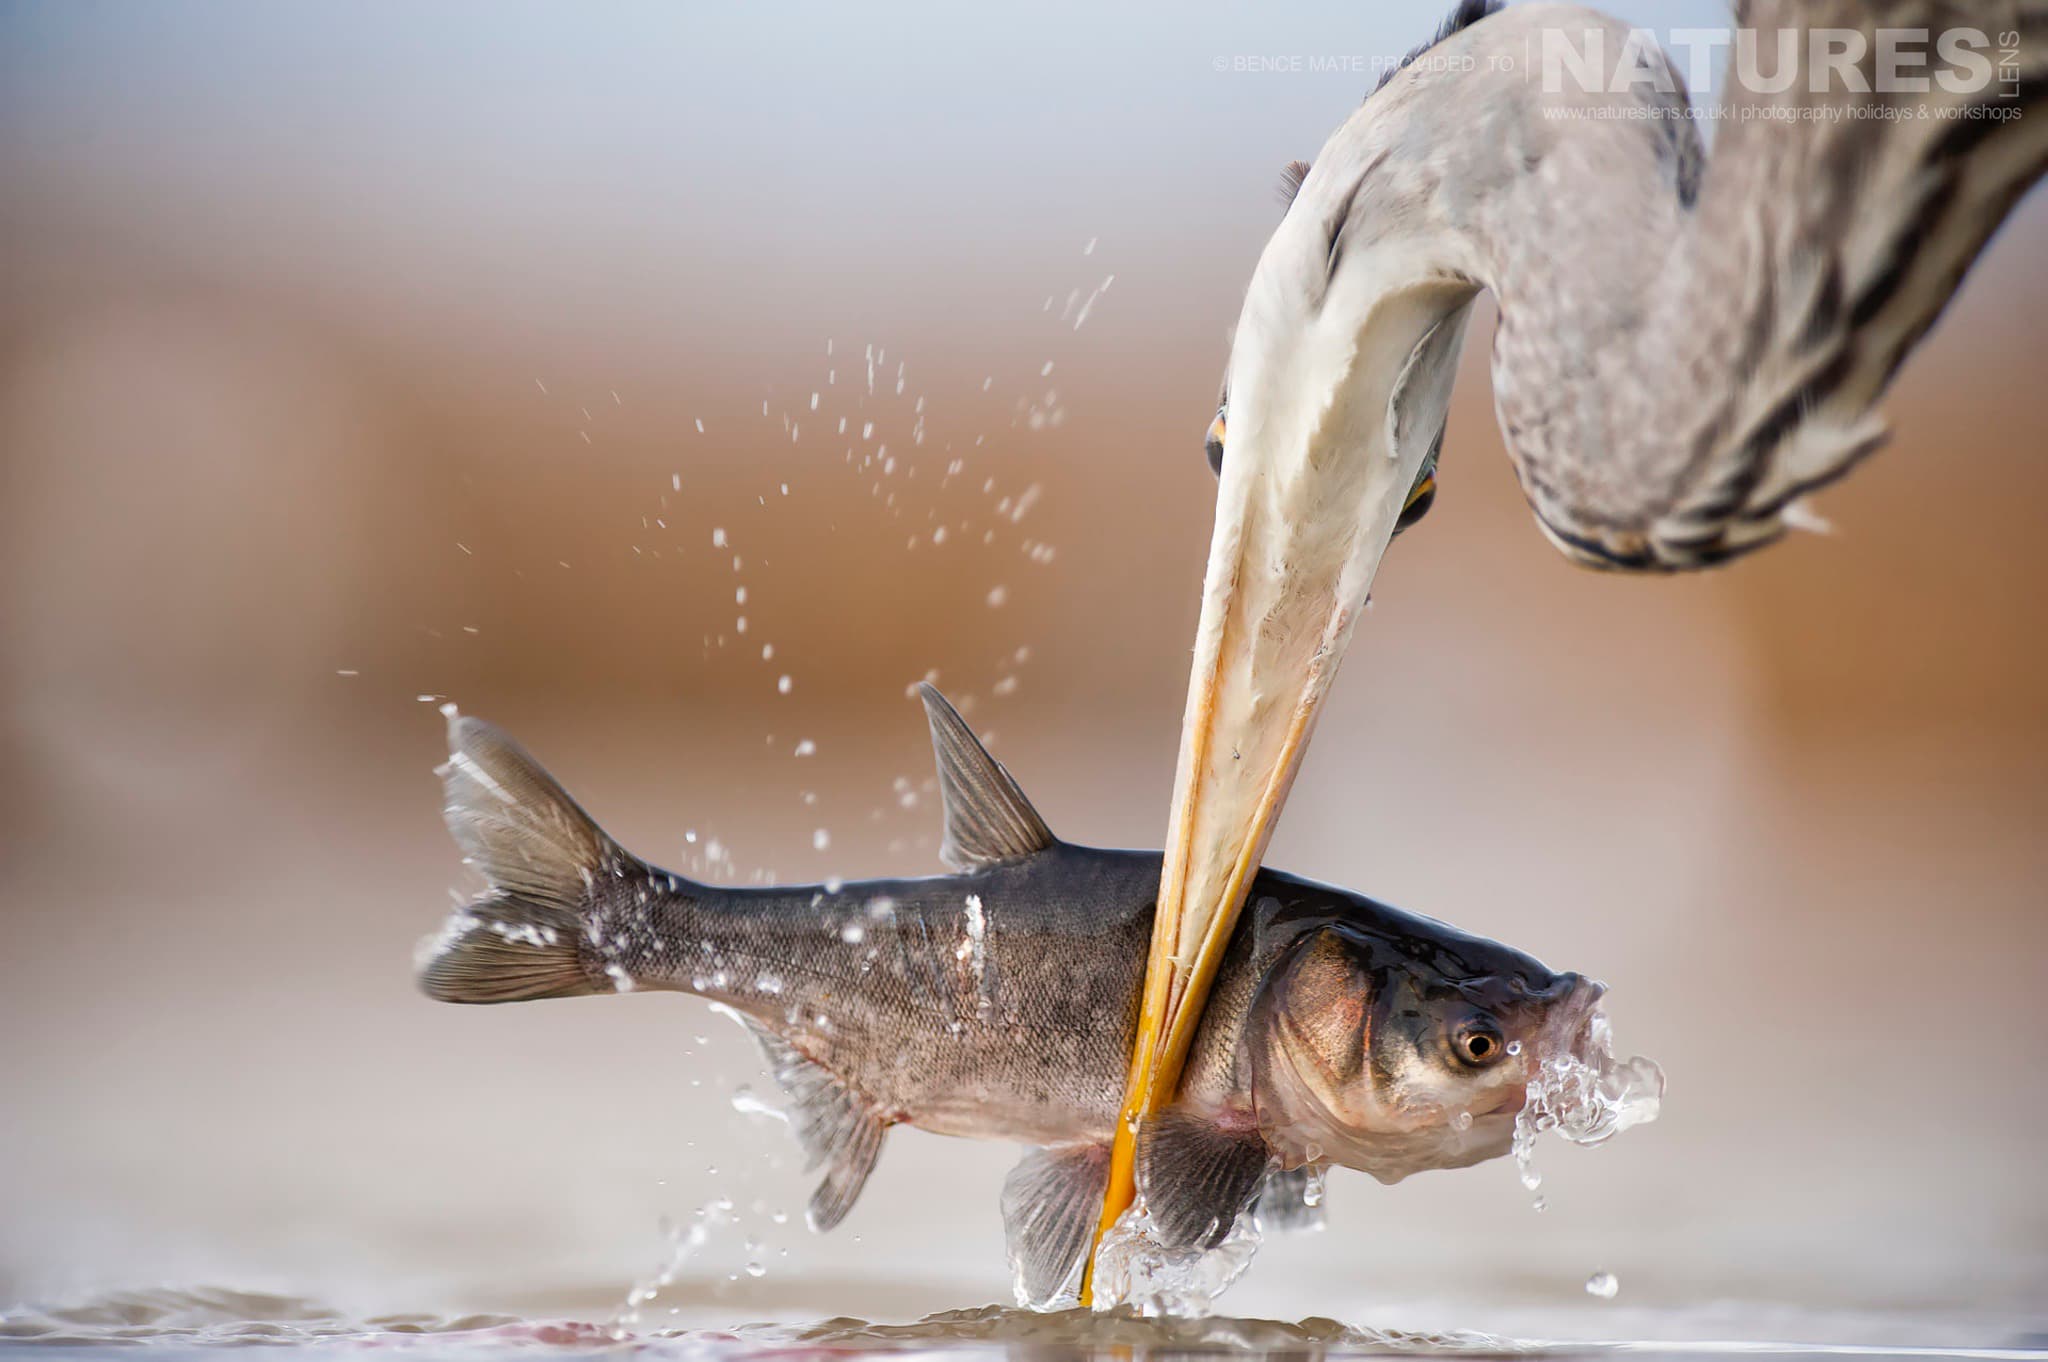 Heron with fish at Bence Mátés Photography Hides during the Hungarian Winter